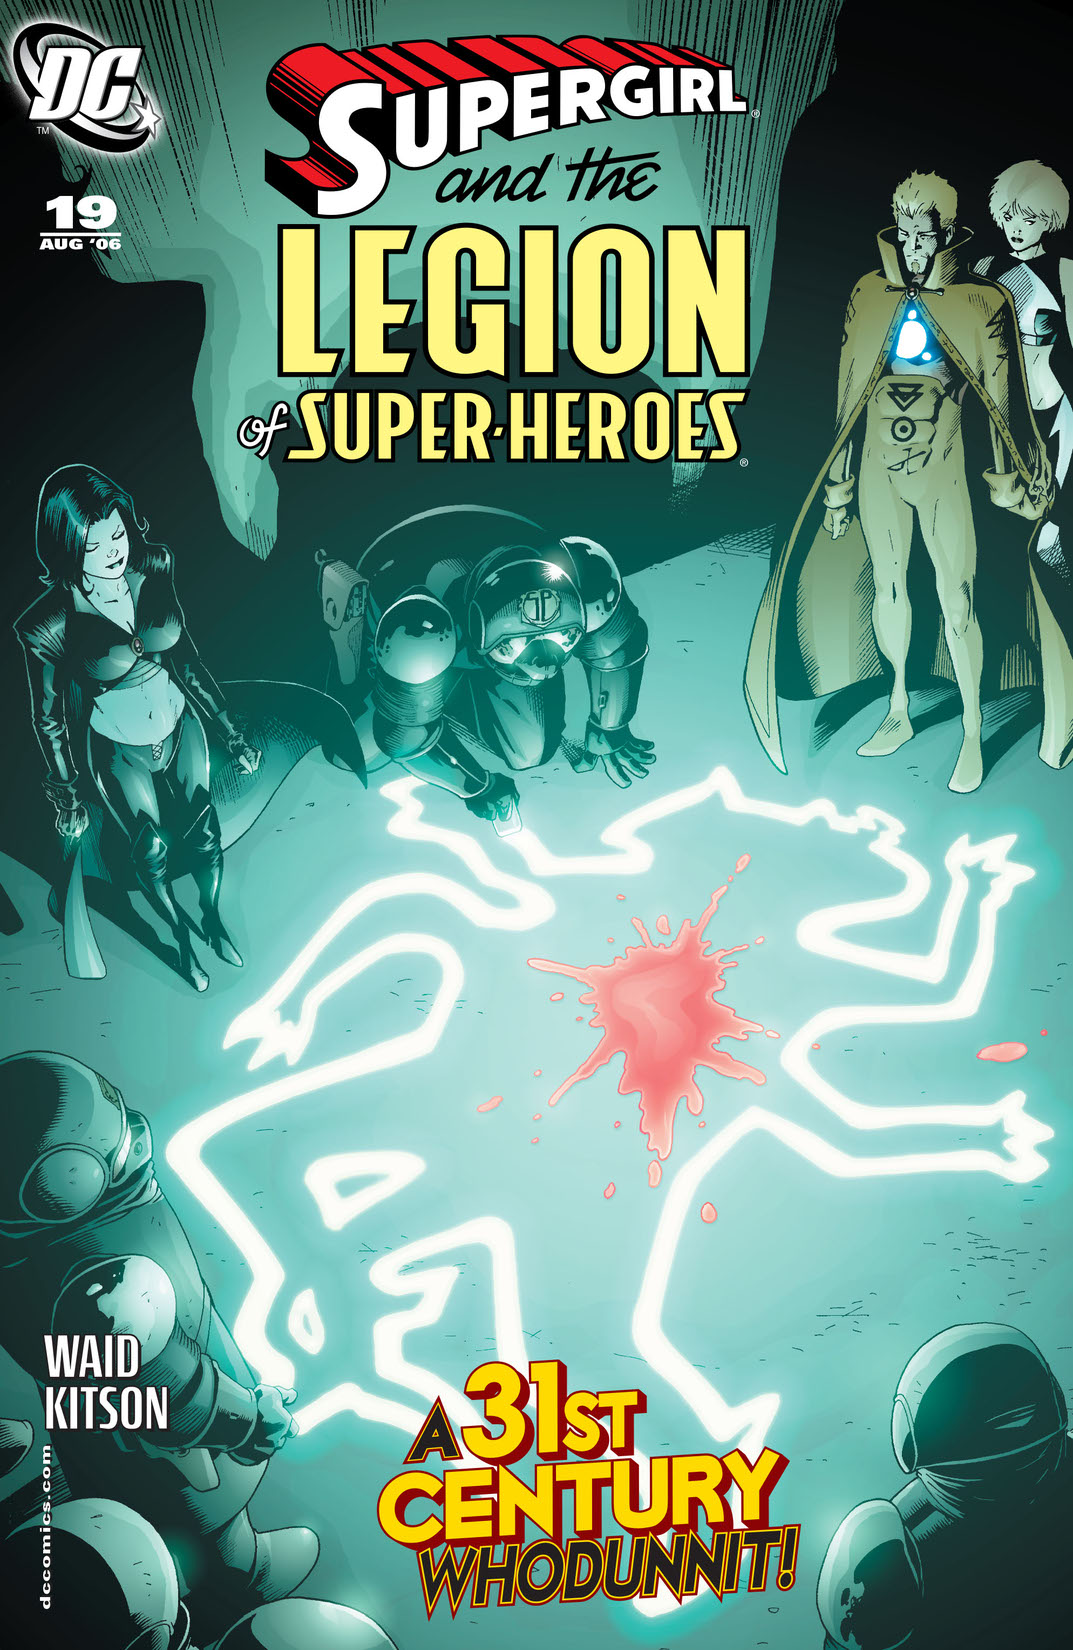 Supergirl and The Legion of Super-Heroes (2006-) #19 preview images